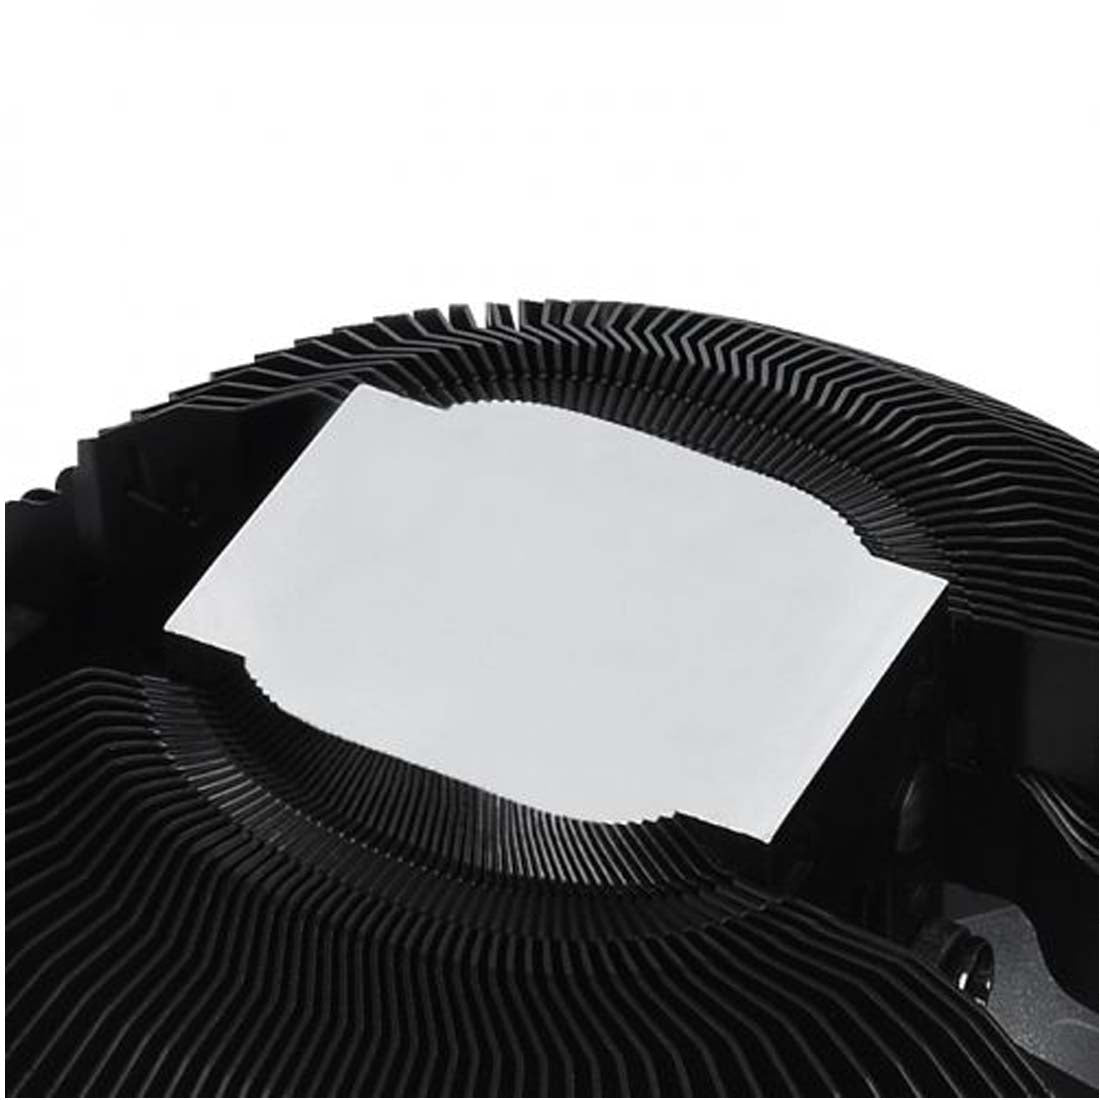 [Repacked]Thermaltake UX100 ARGB Lighting CPU Cooler with 16.8 million colors of ARGB LED